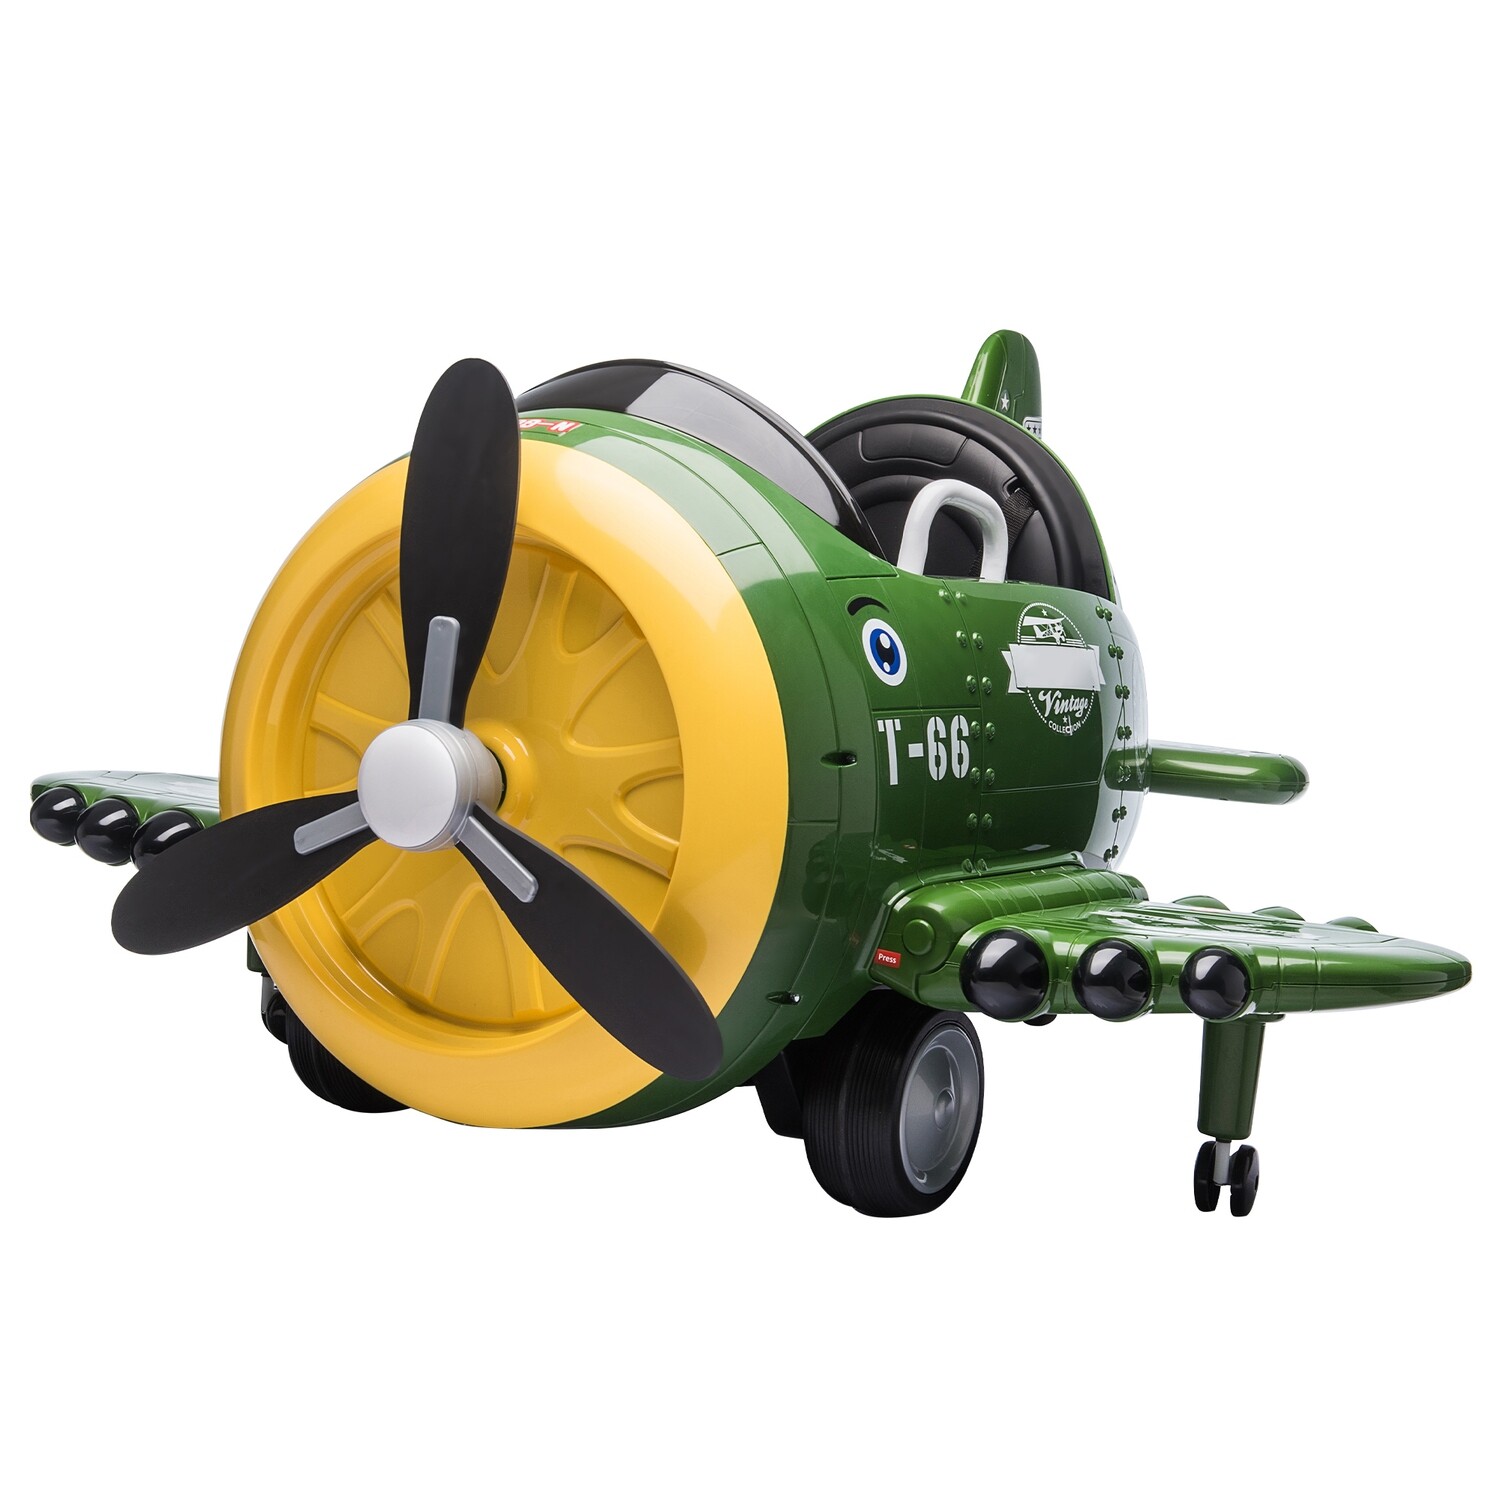 12V Electric Kids Ride on Toy Plane with USB, FM, Wind-Driven Propeller, 360-Degree Rotating by 2 Joysticks, Remote Control for Kids 3 to 6, Army Green, Options: Army Green+Polypropylene